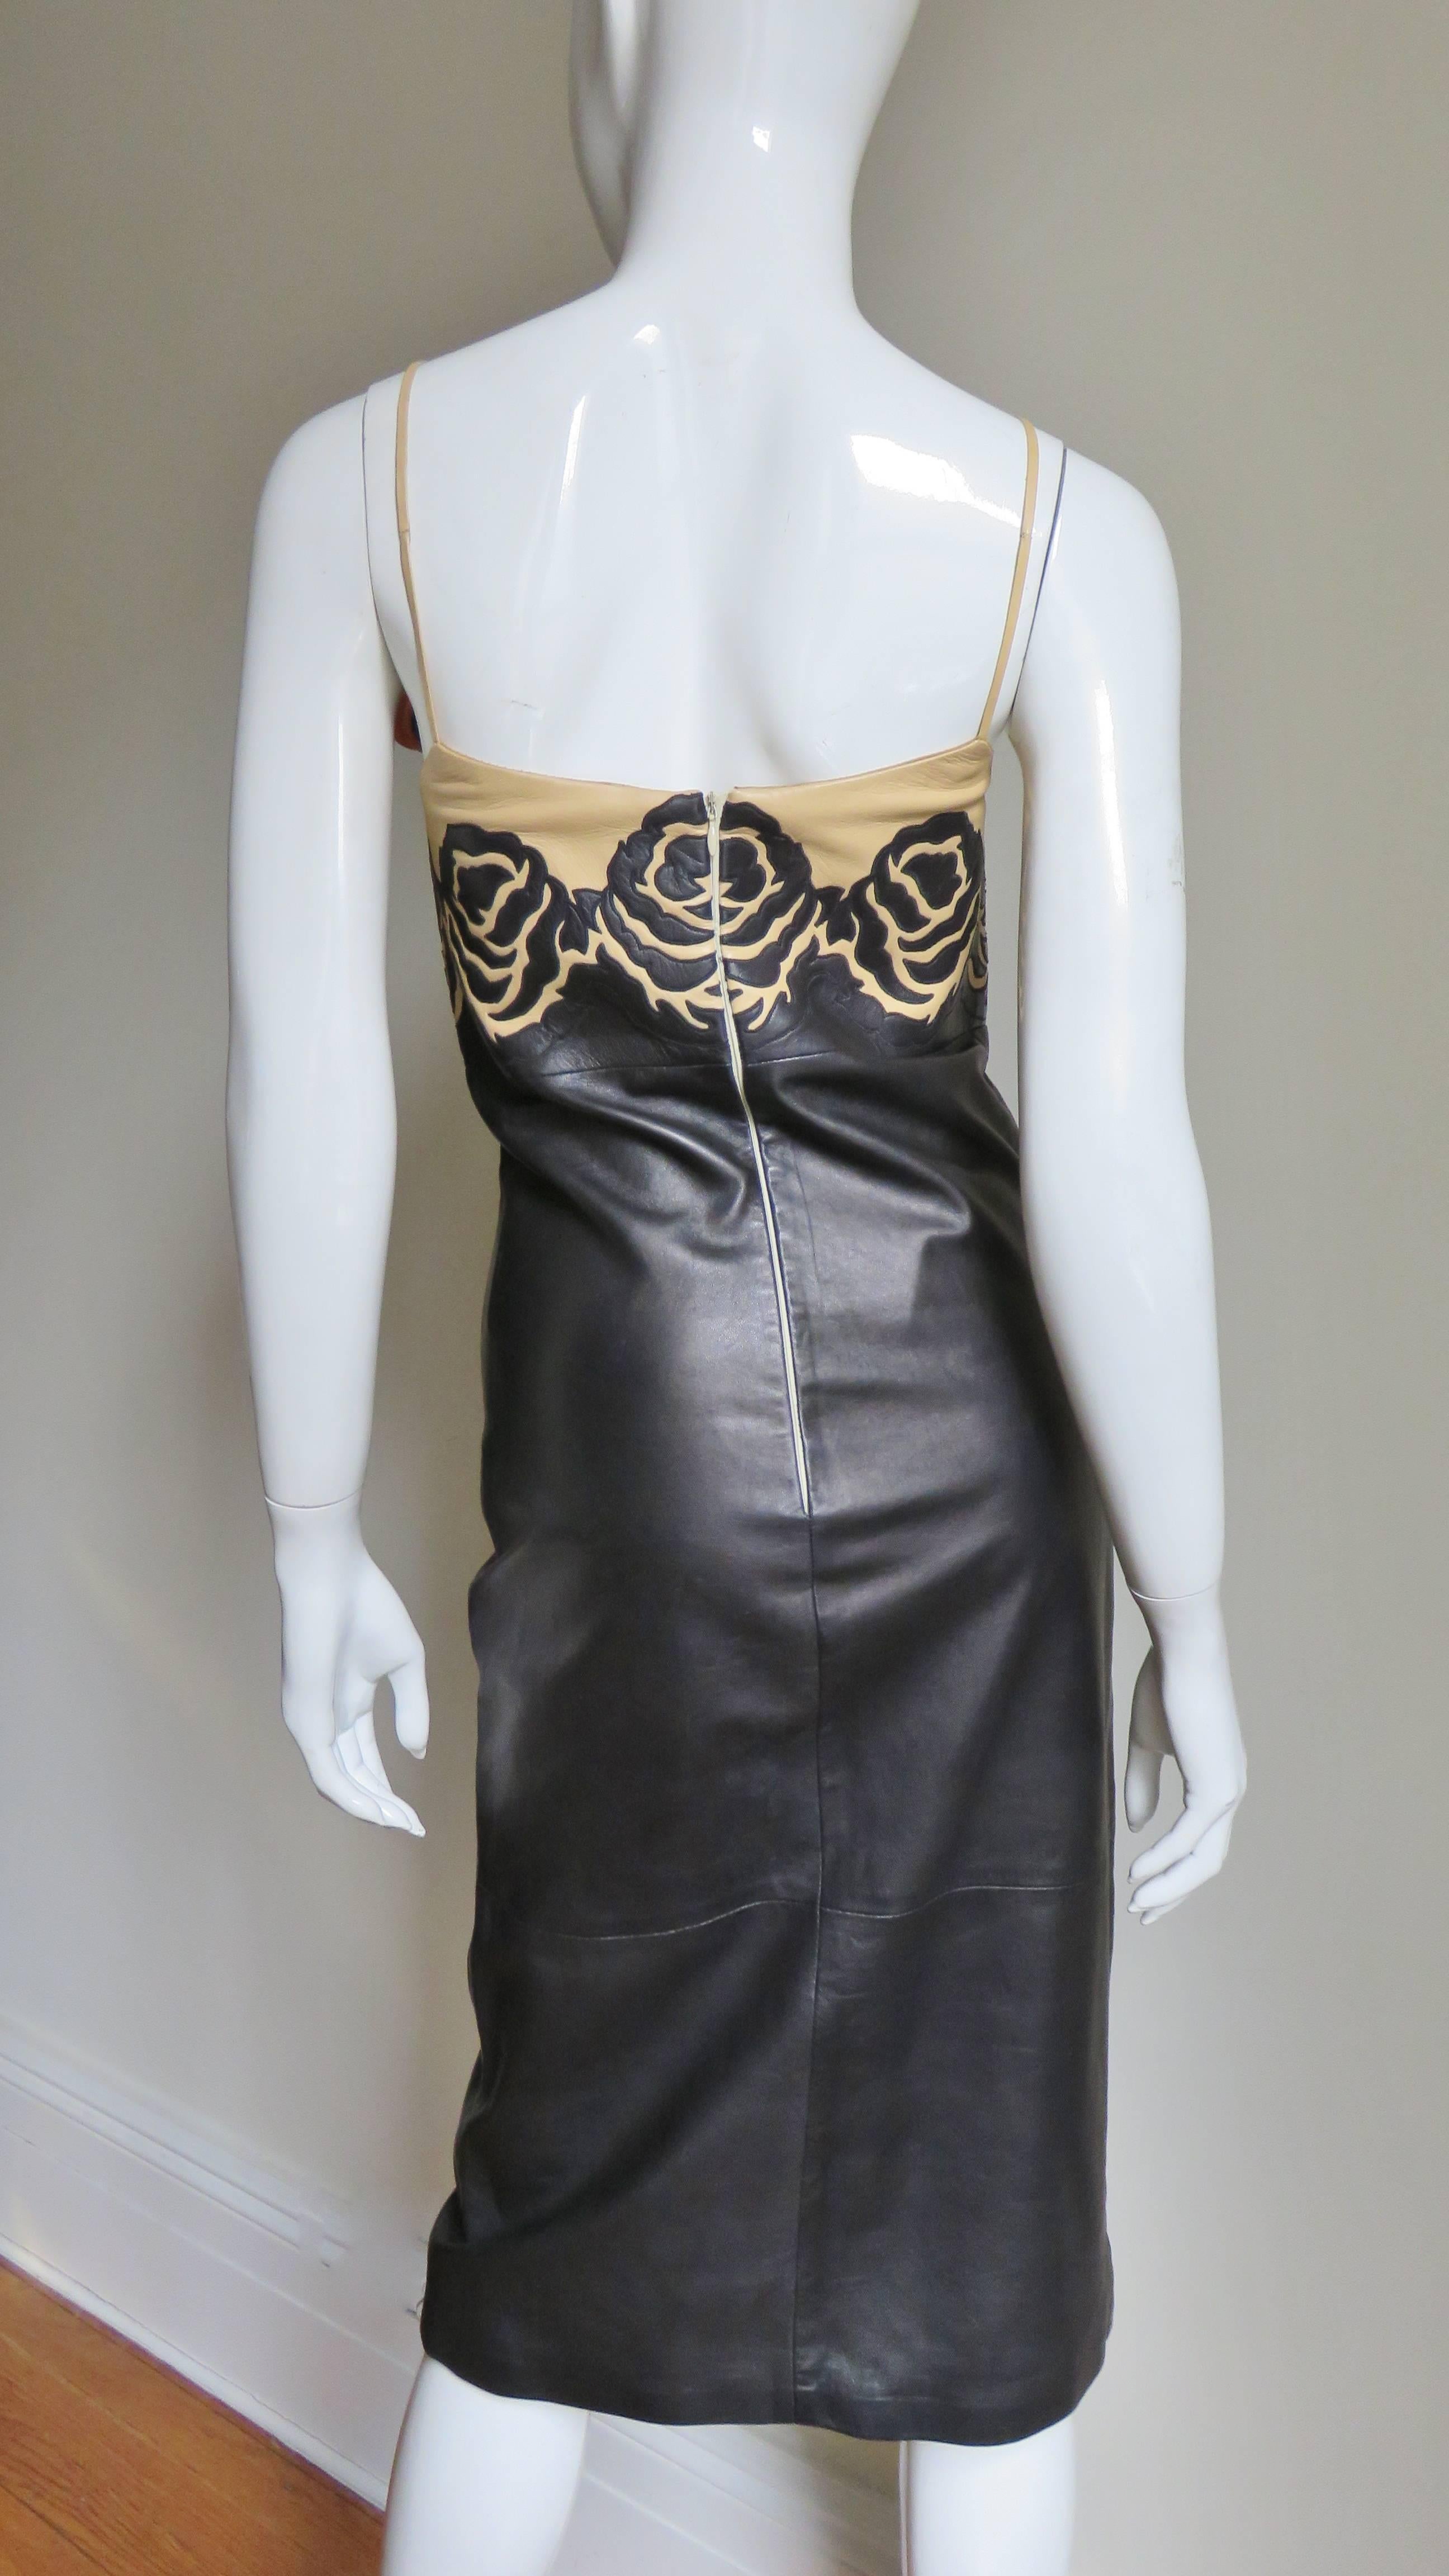  Gianni Versace Leather Color Block Dress with Applique Roses 1990s 4